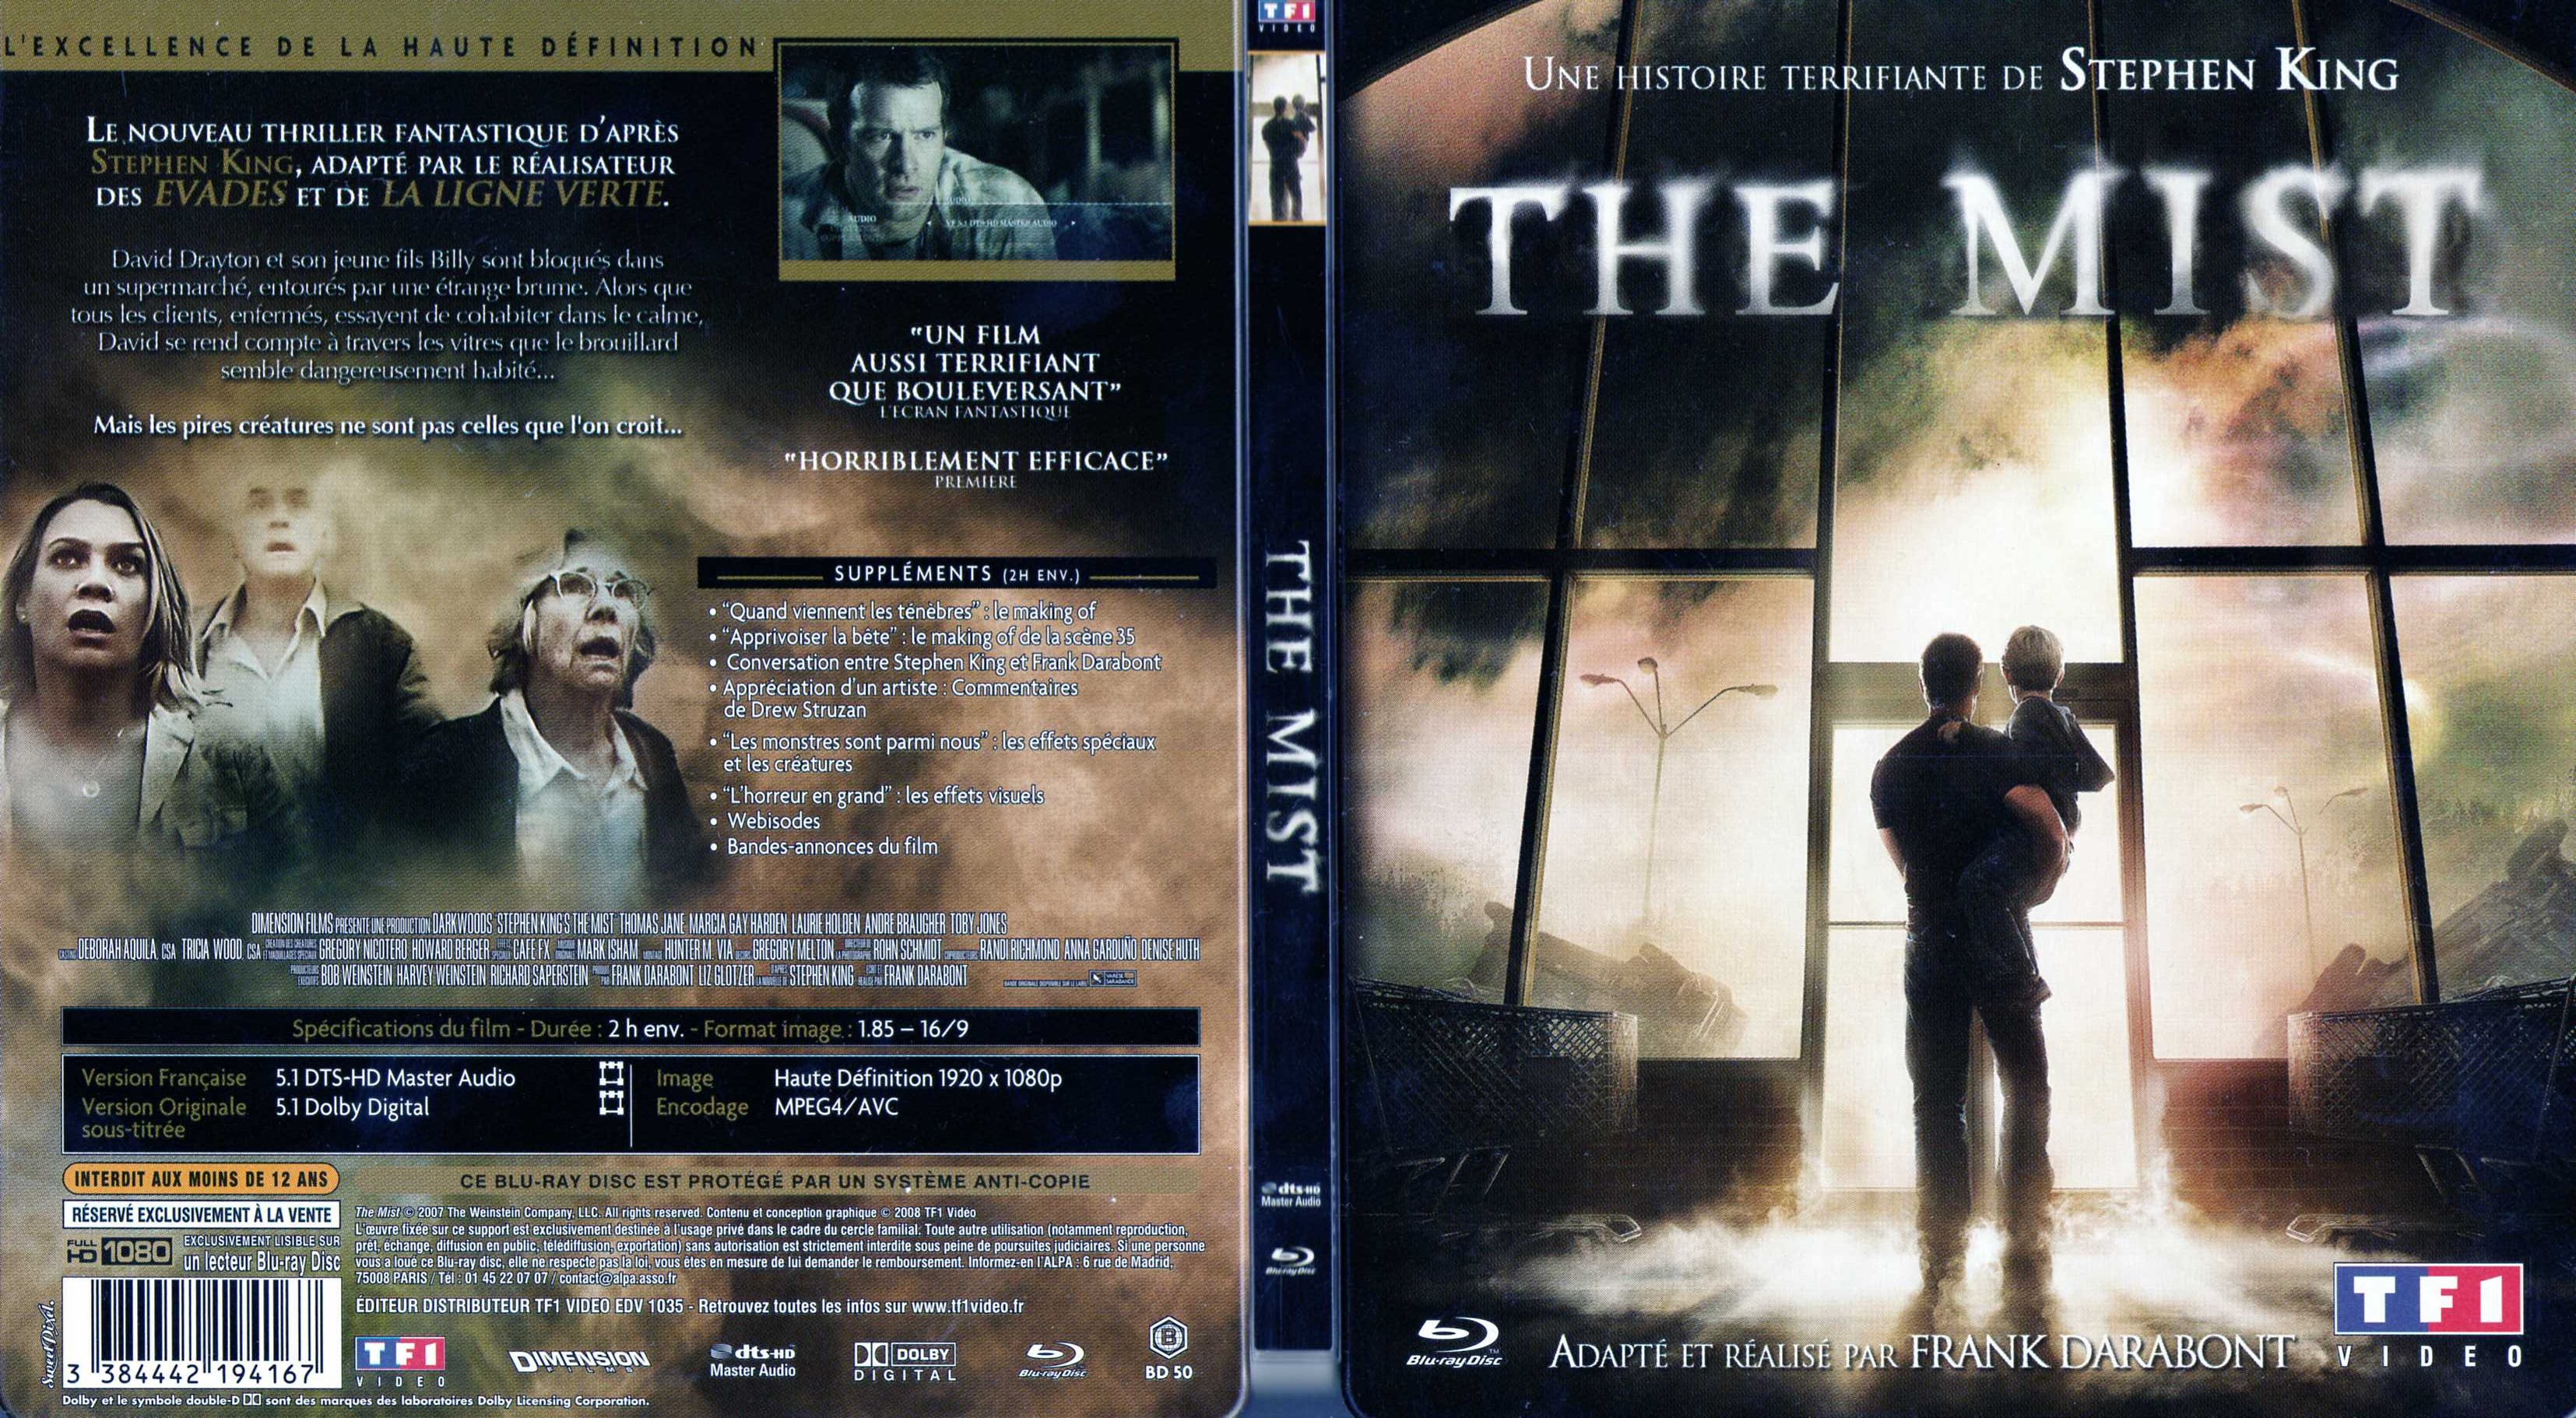 Jaquette DVD The mist (BLU-RAY)